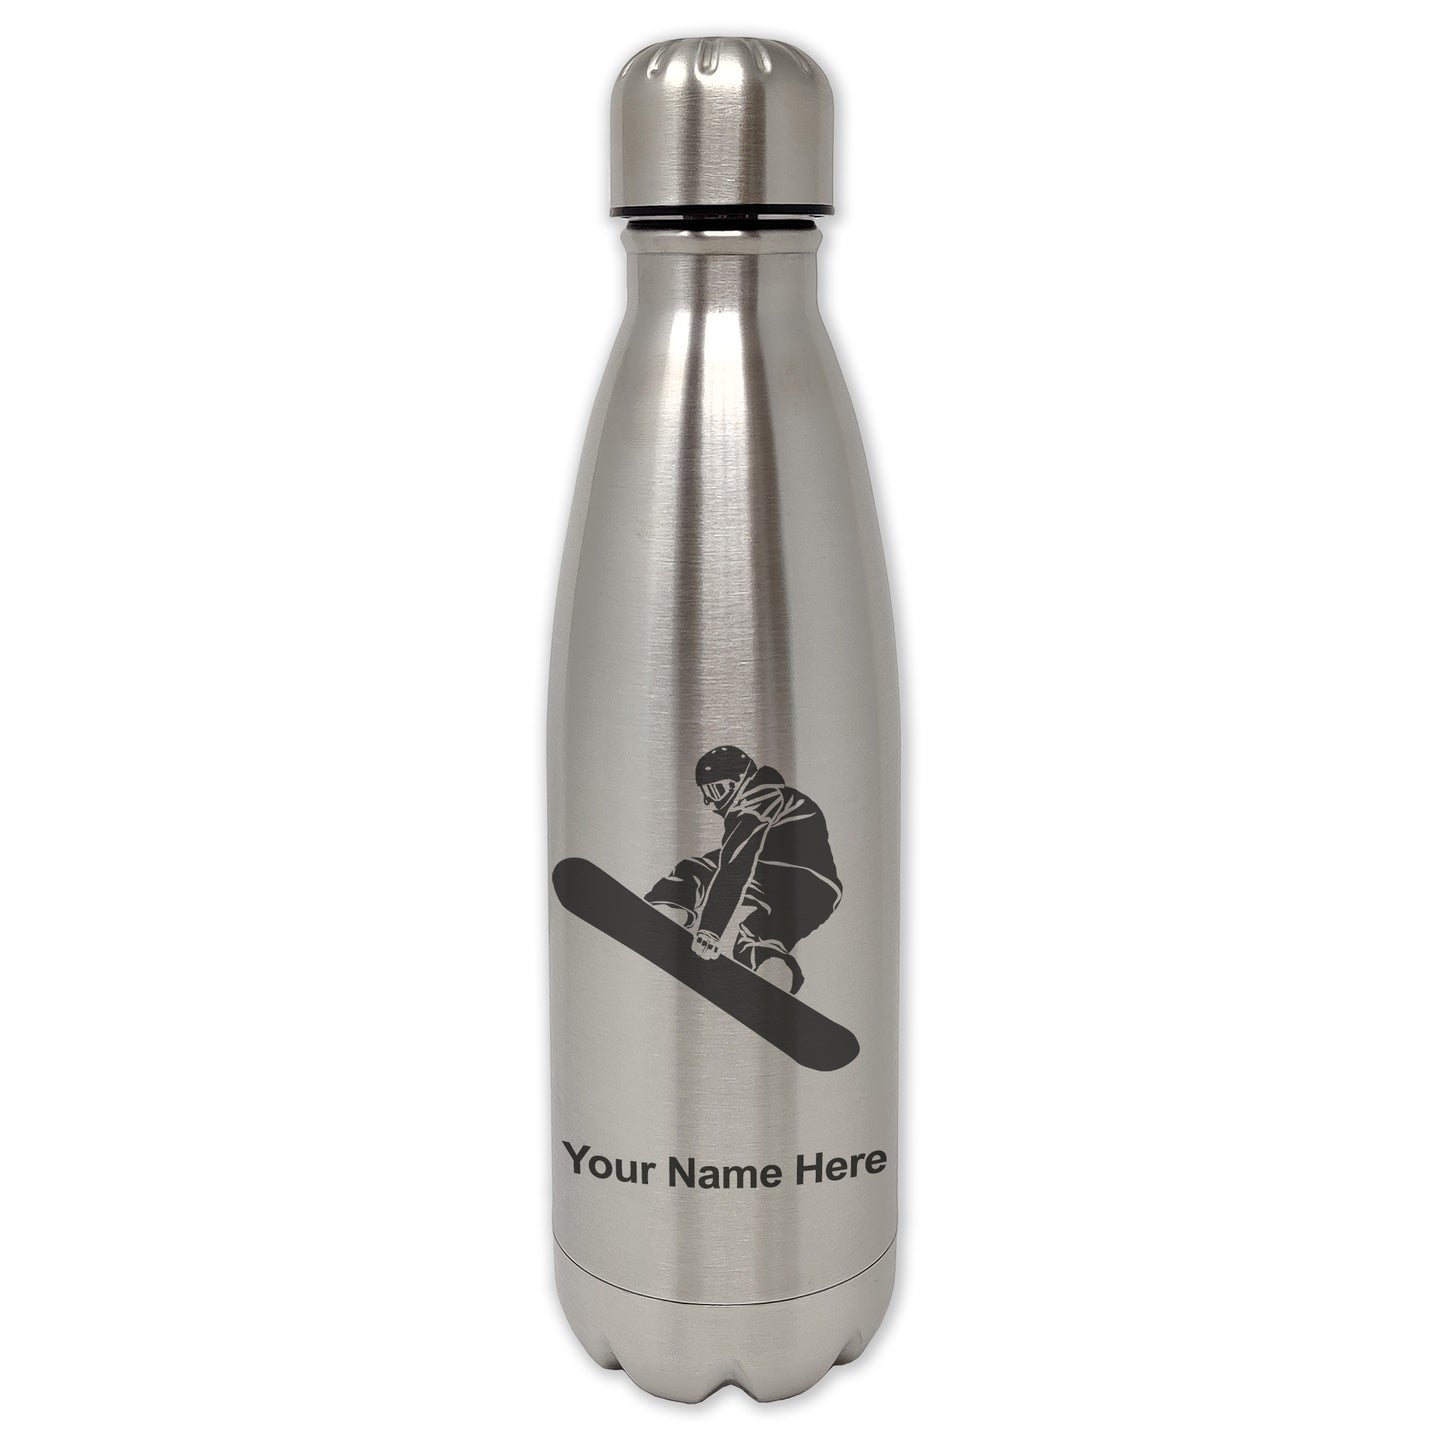 LaserGram Single Wall Water Bottle, Snowboarder Man, Personalized Engraving Included